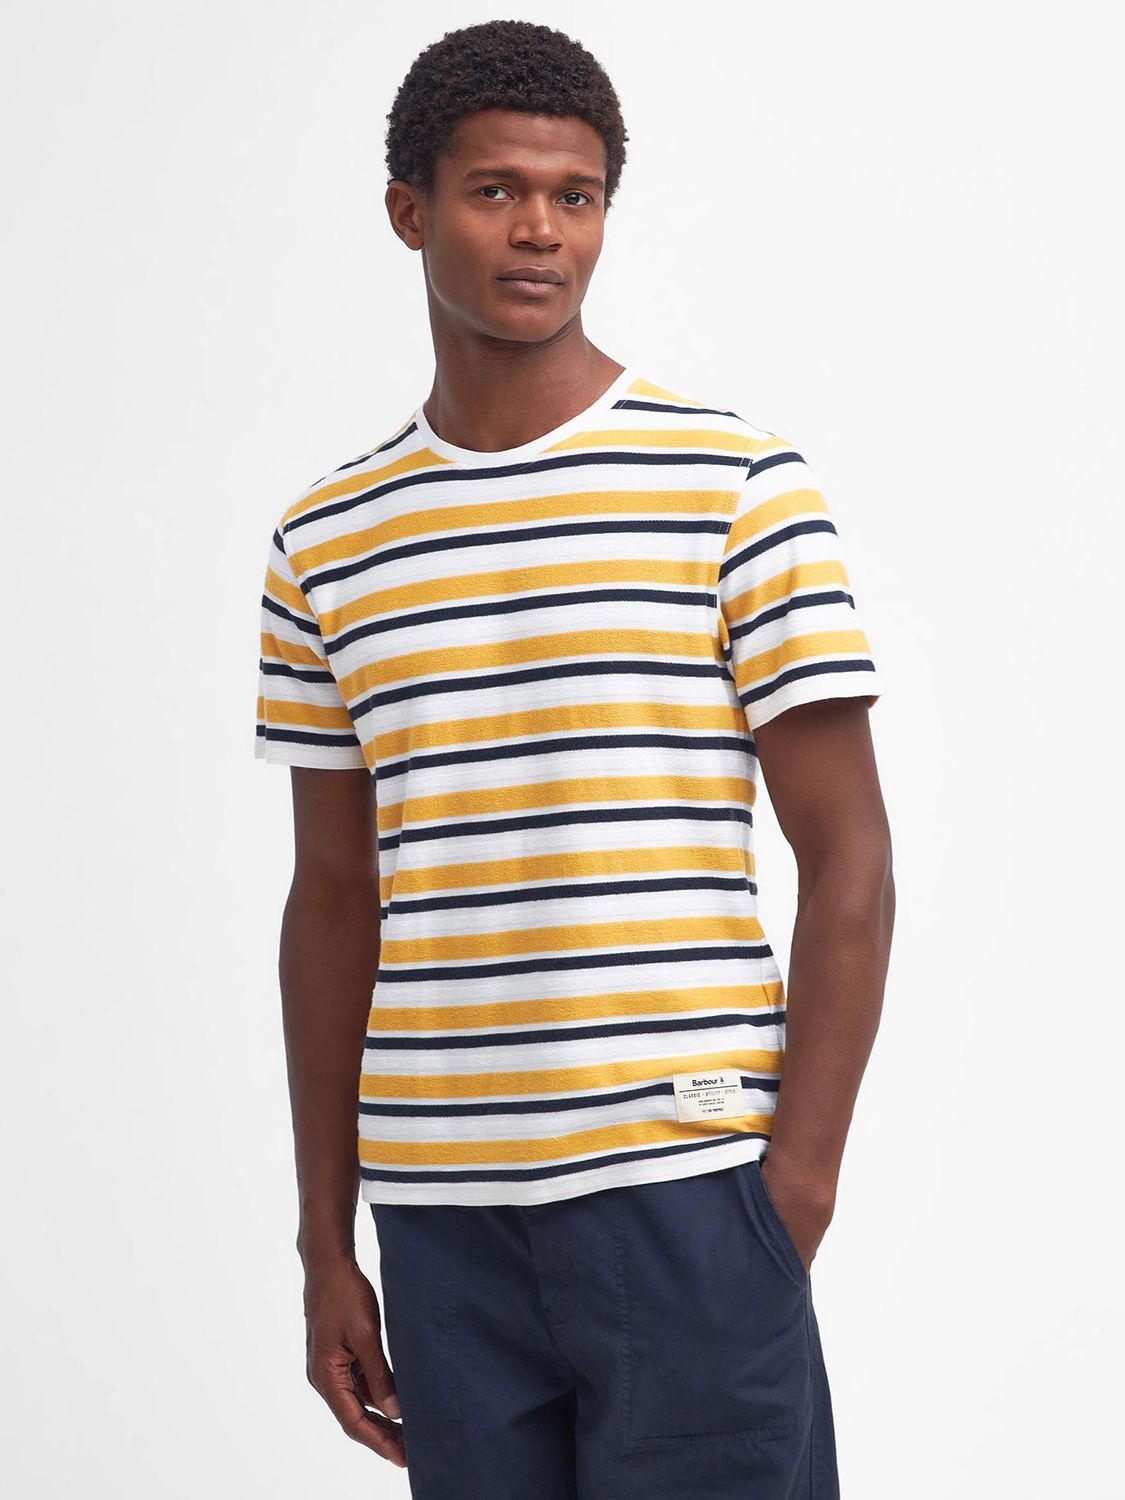 Barbour Whitwell Stripe T-Shirt, Yellow/Multi at John Lewis & Partners